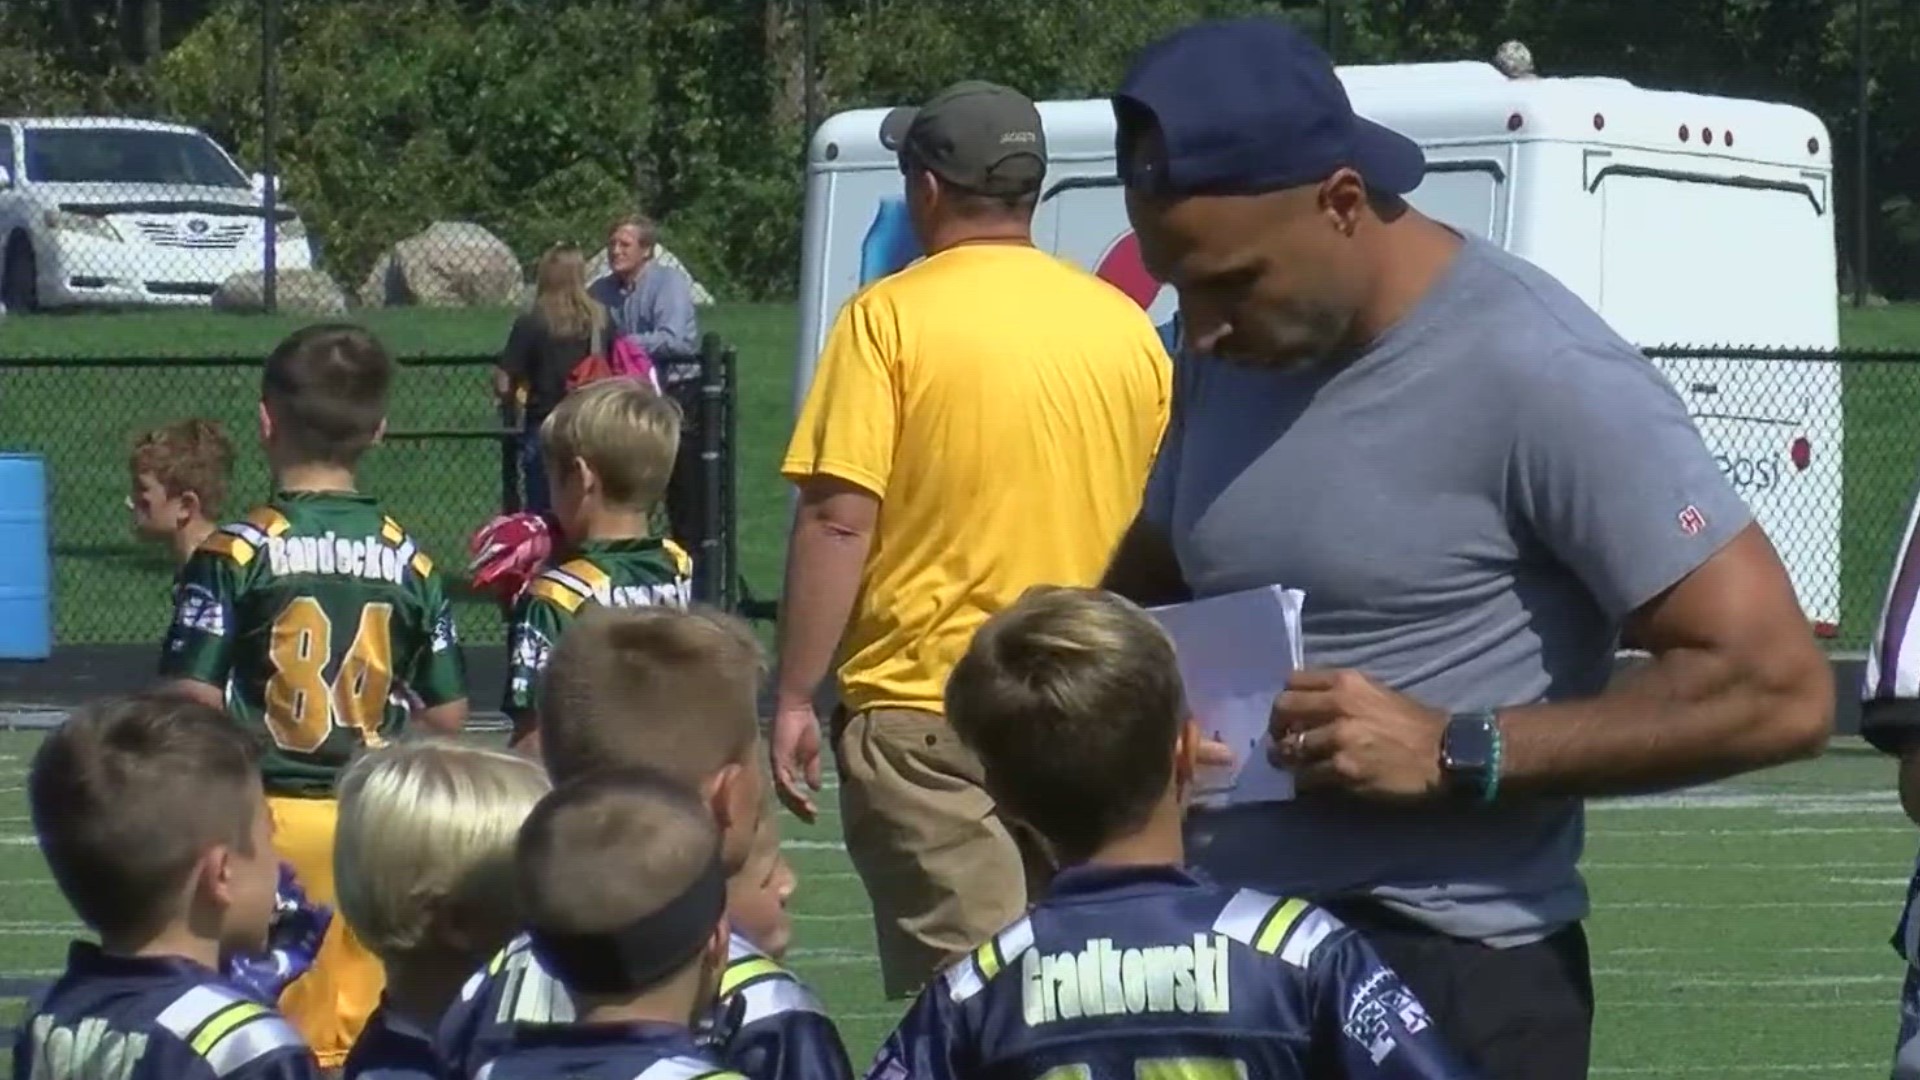 After a successful college career as a star QB with the Toledo Rockets, Gradkowski spent 11 years in the NFL. But flag football might be his biggest challenge yet.